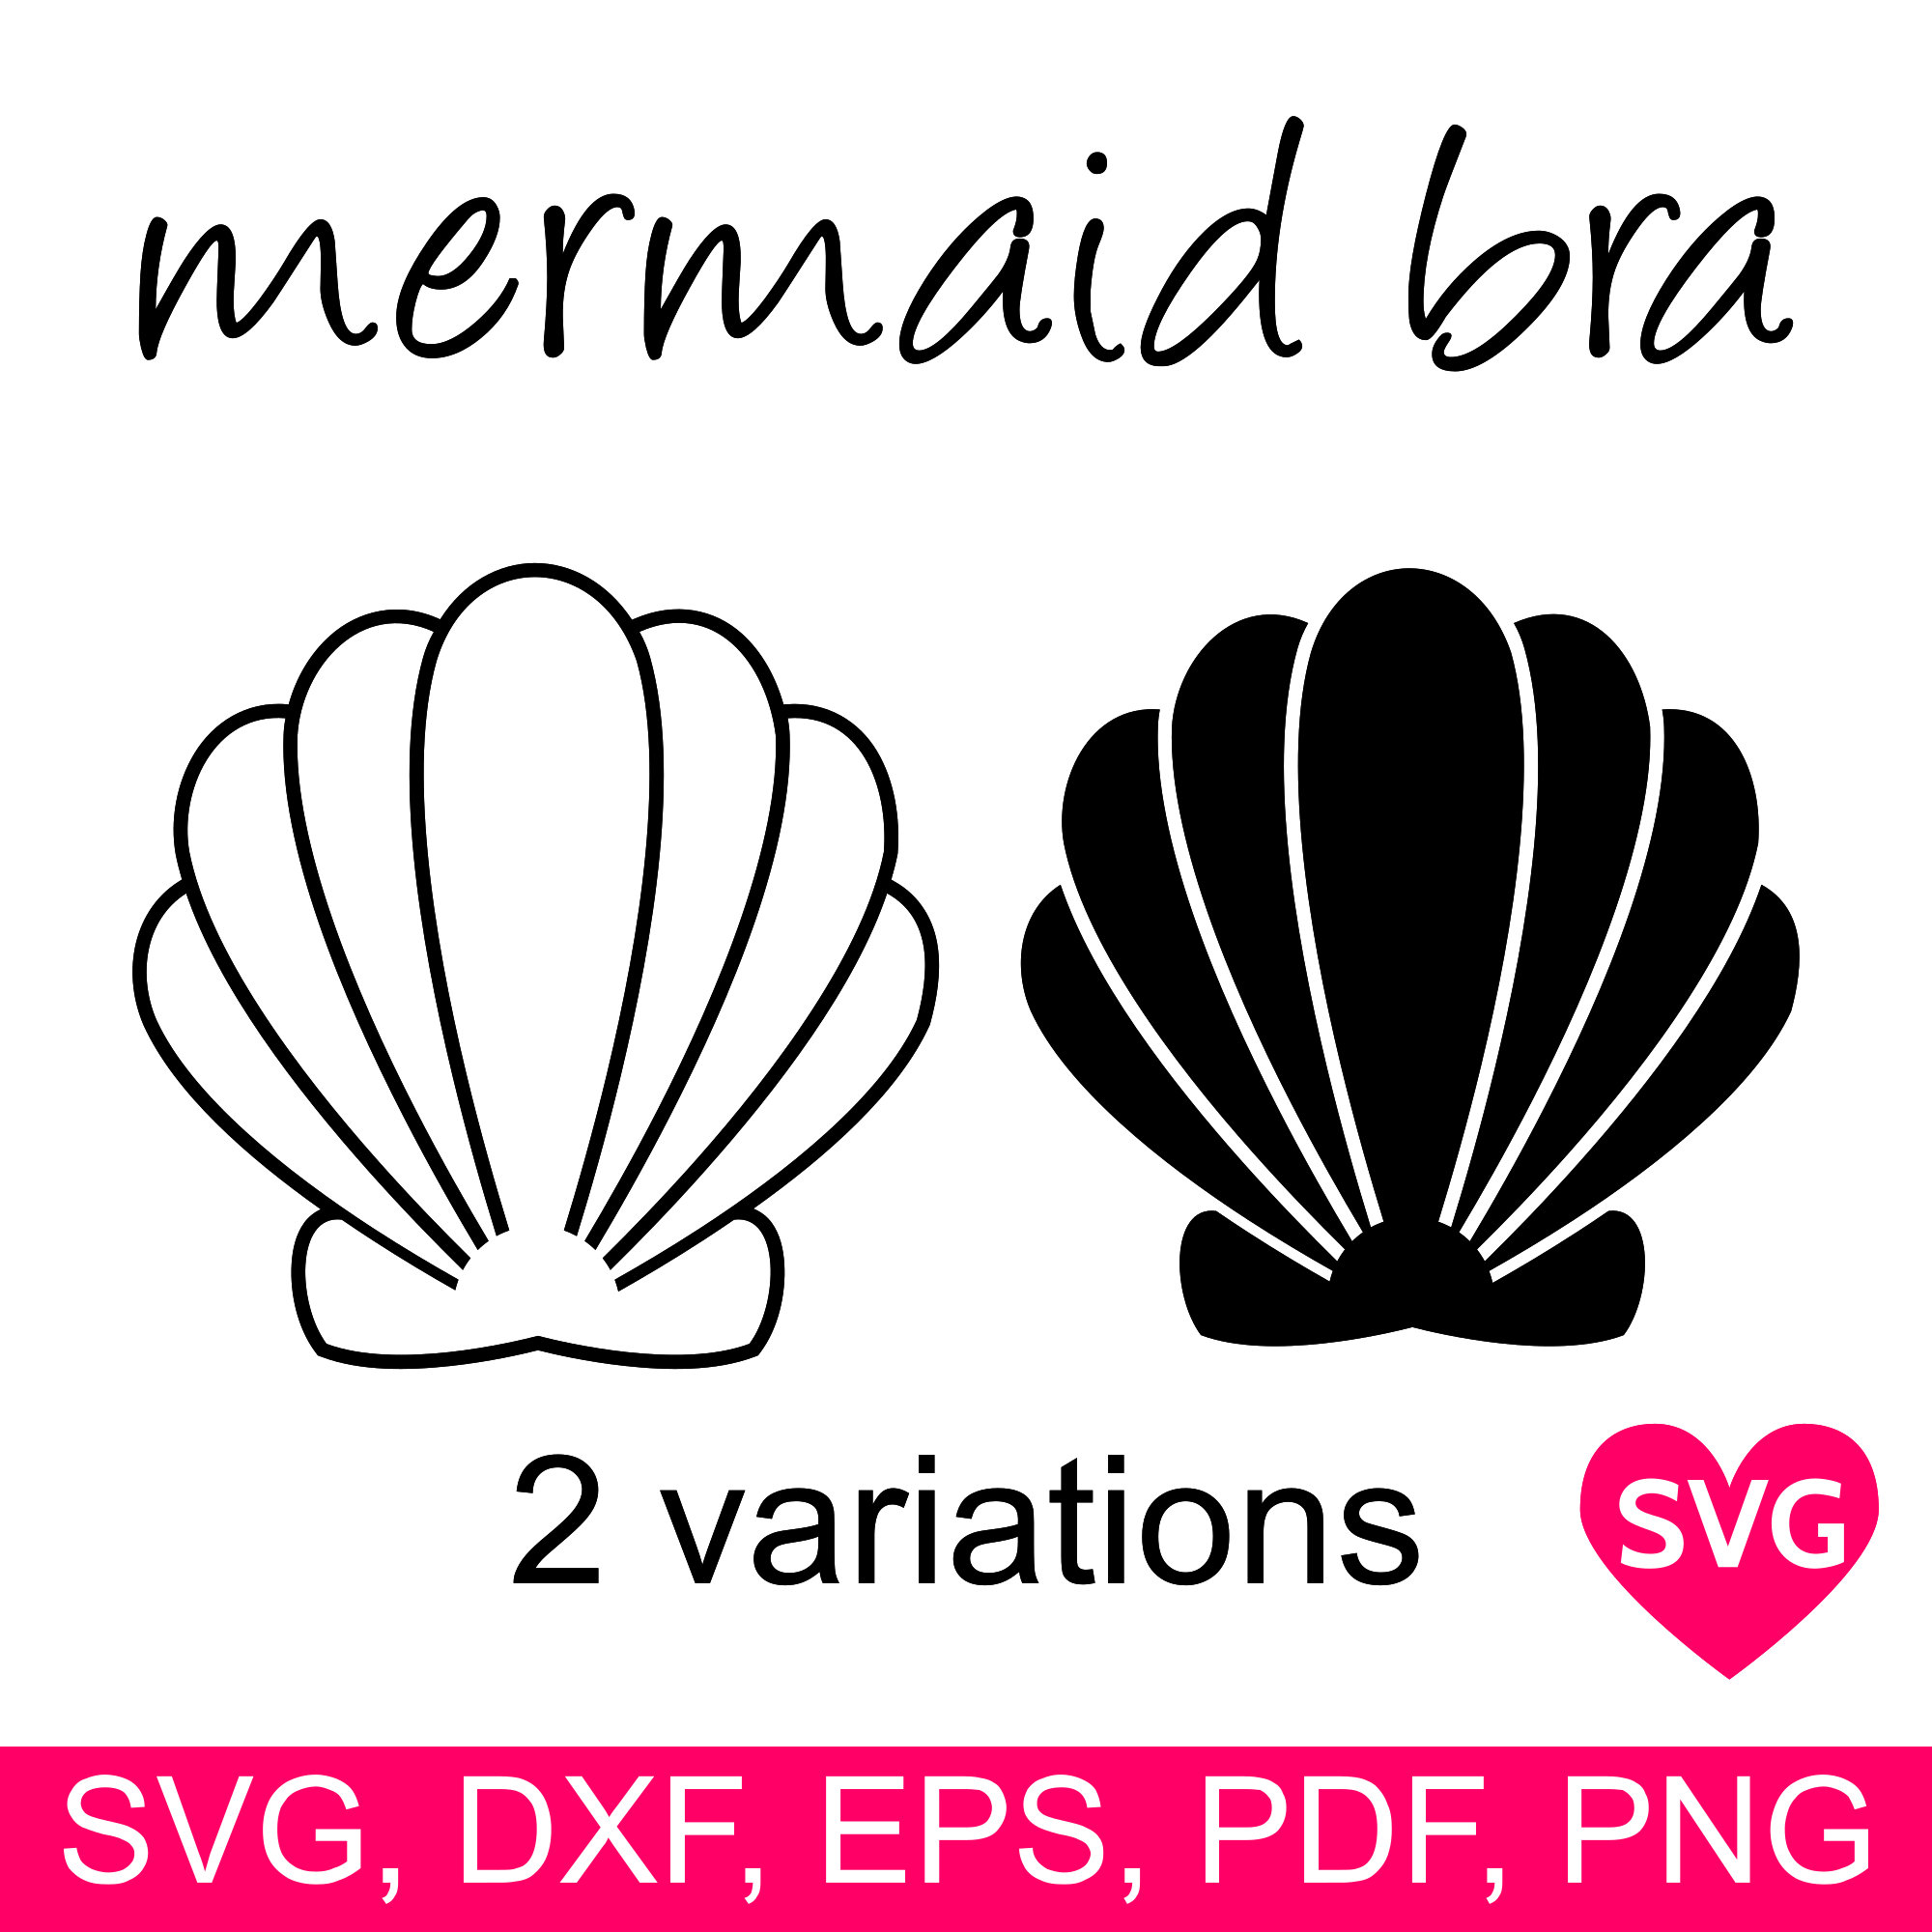 Mermaid Bra with Sea Shells SVG file for Cricut and Silhouette to make